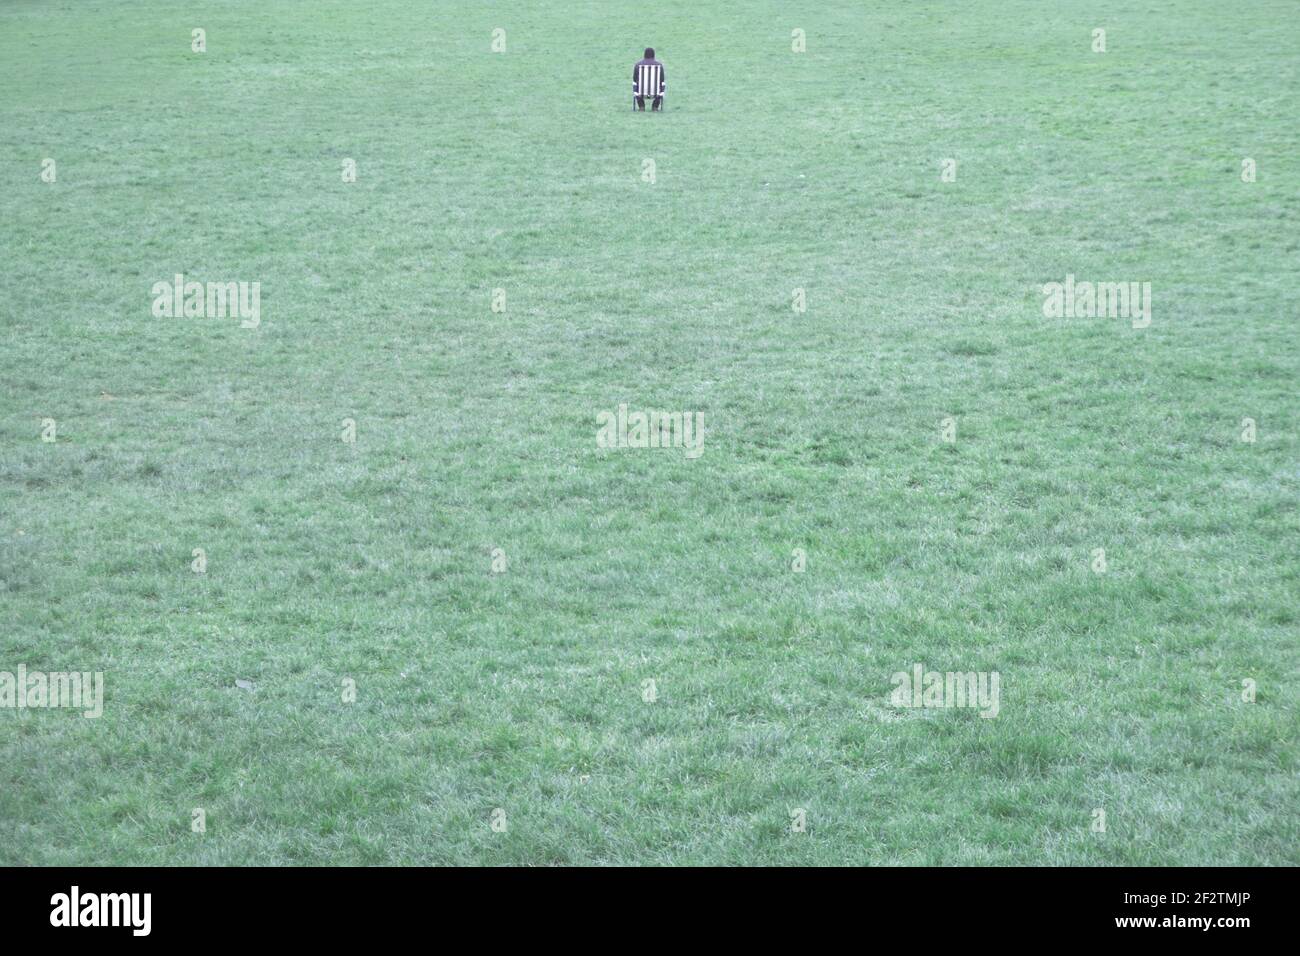 Portraying contemplation and solitude, a man sits alone on a deck chair in the middle of a field in Richmond Park, London, UK Stock Photo